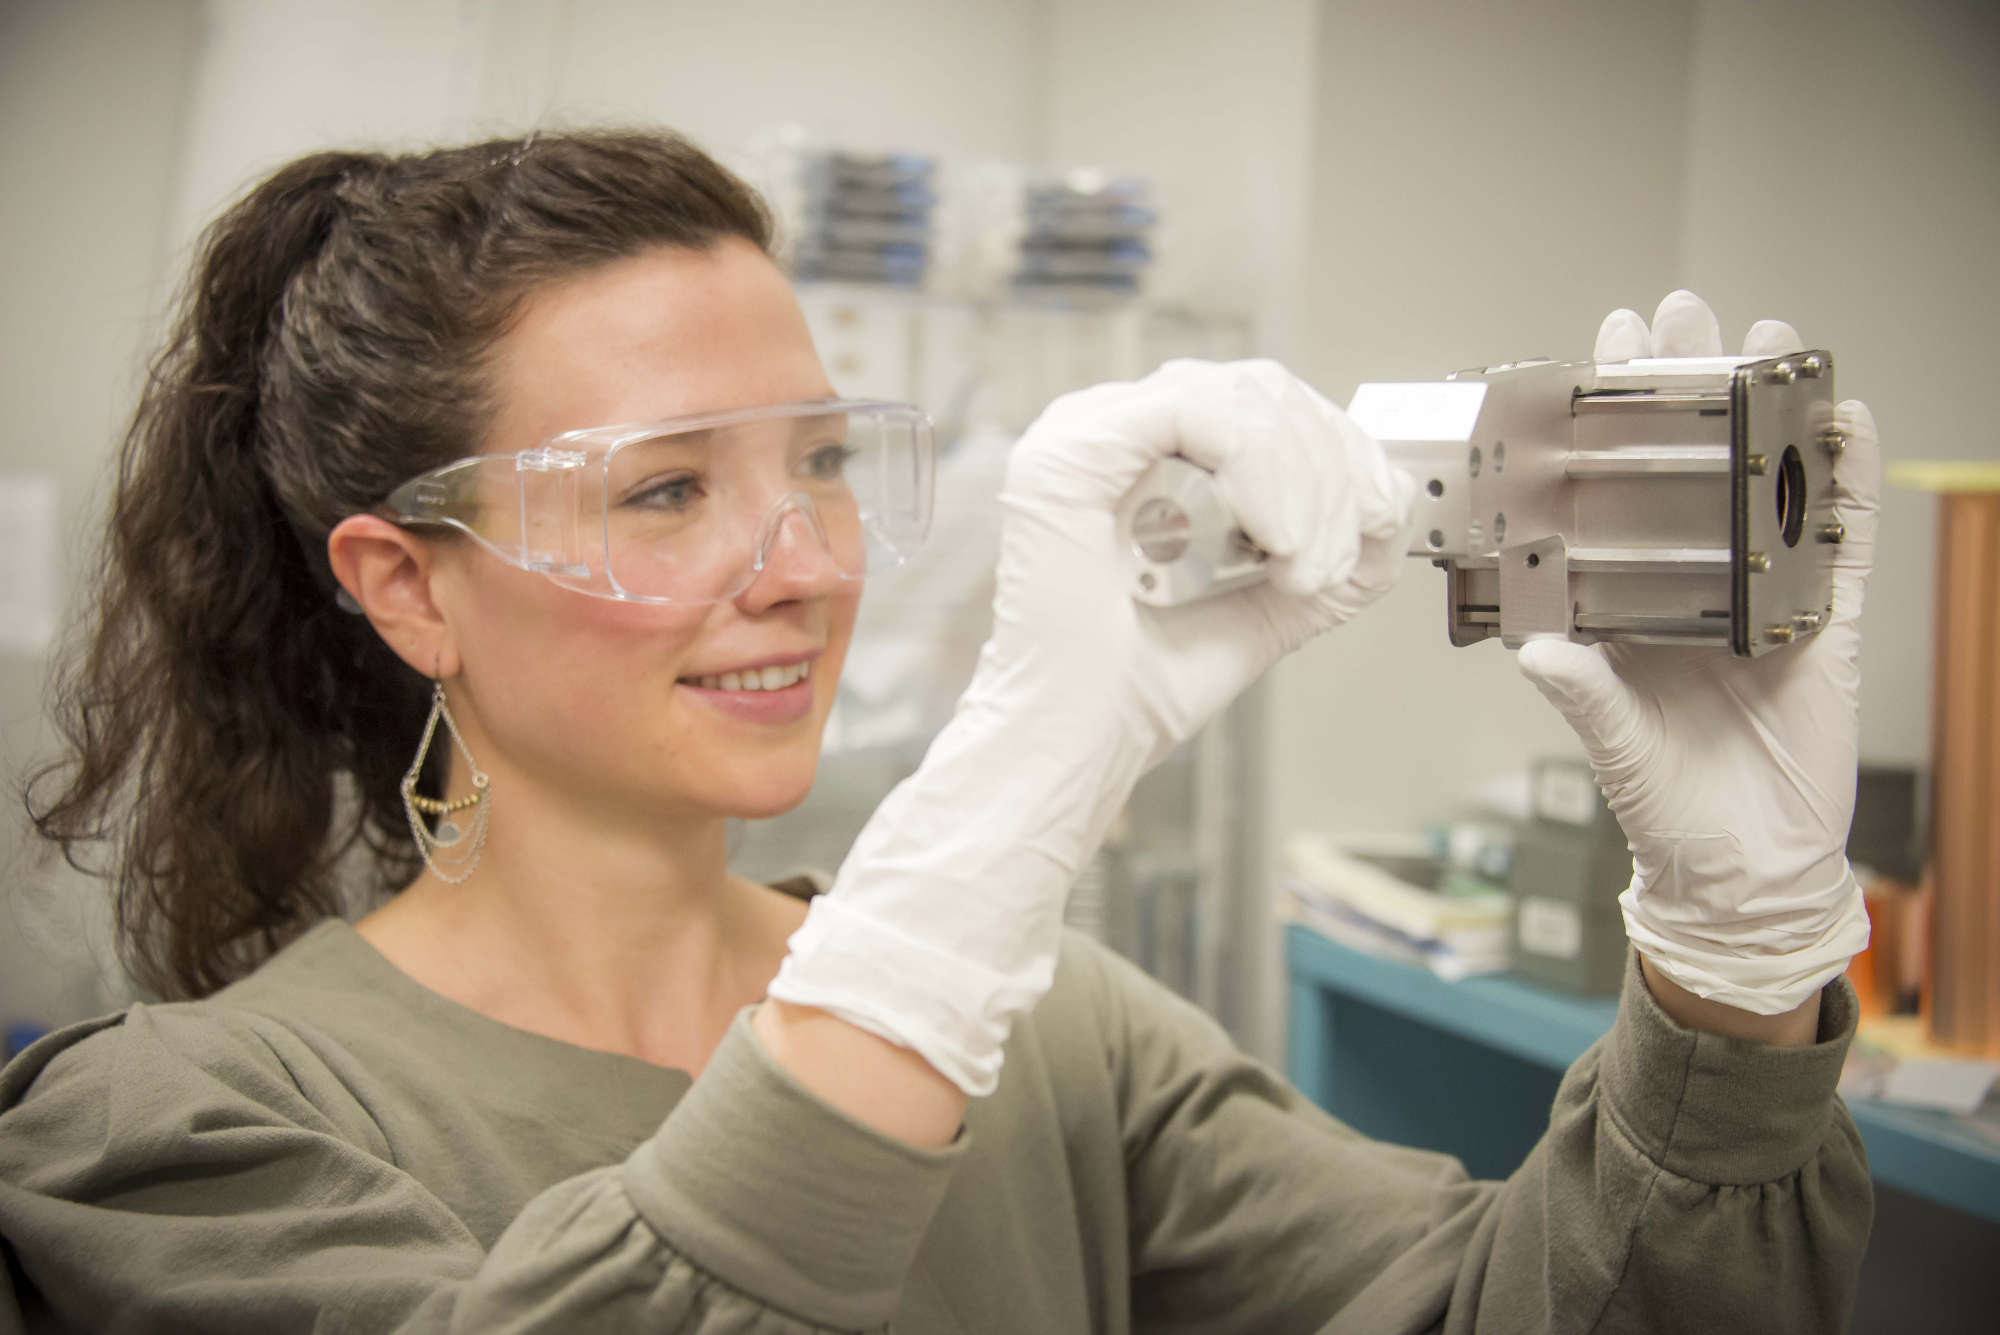 Danae Polsin in safety goggles and gloves holds up and analyzes a piece of lab technology.